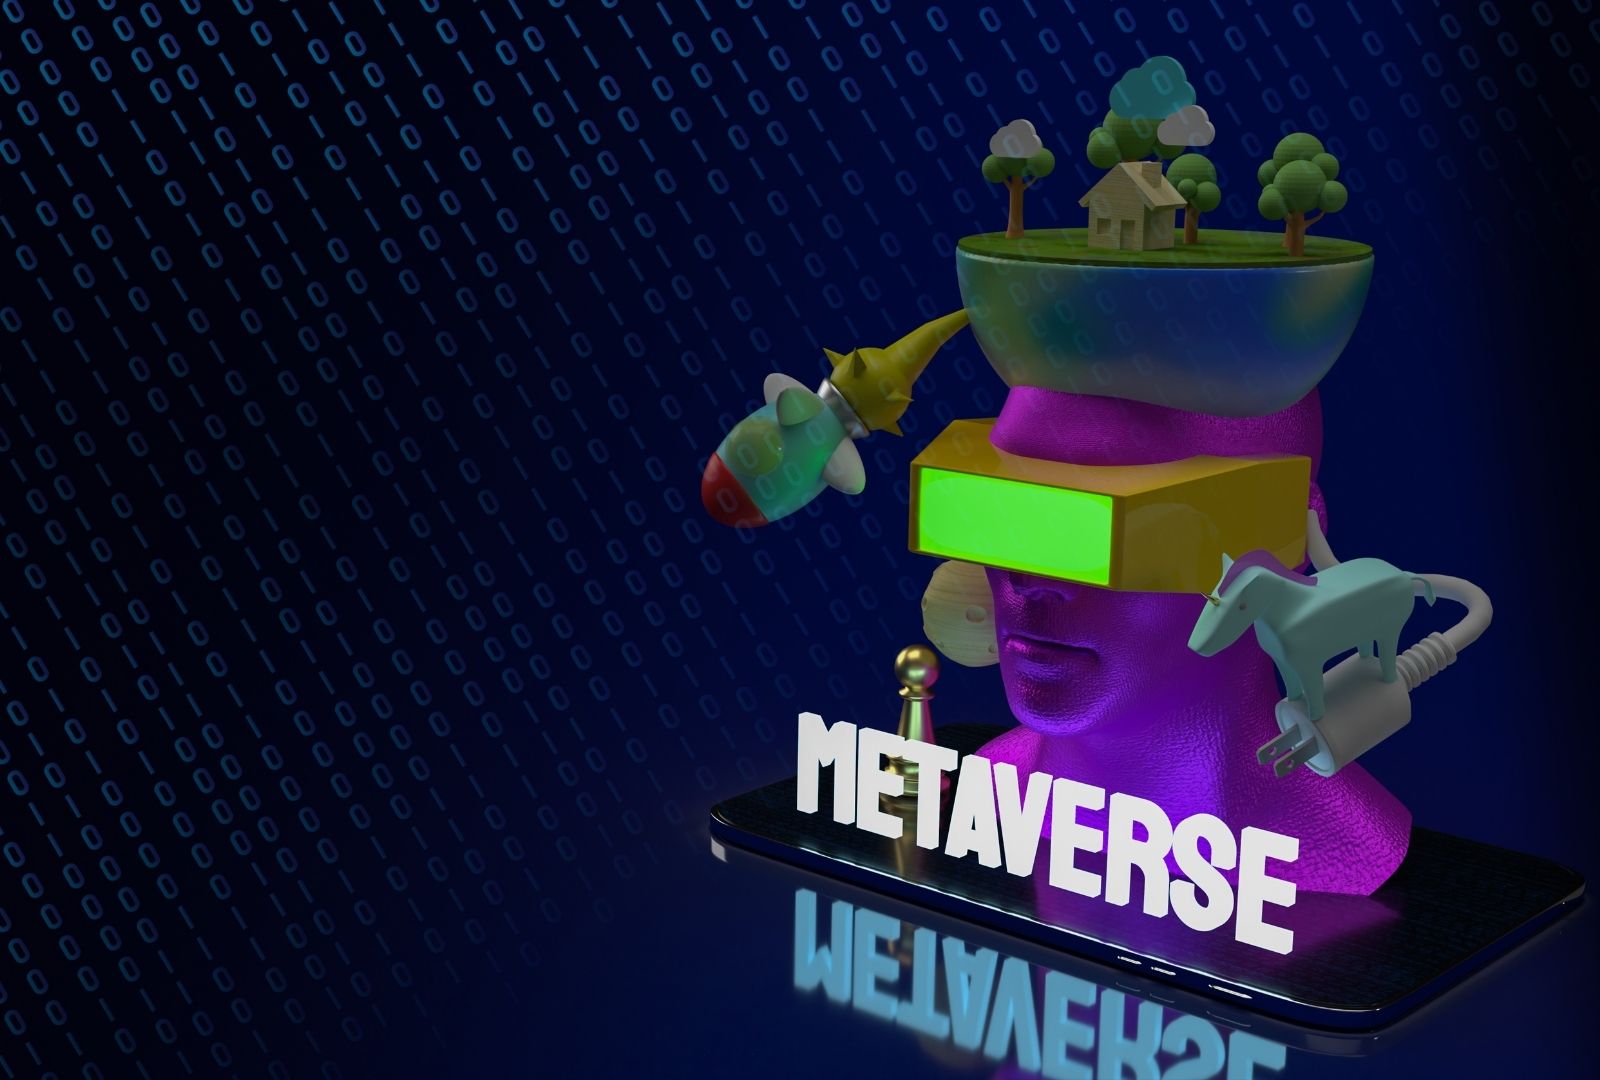 Will The Metaverse Send Education Into A New Dimension?